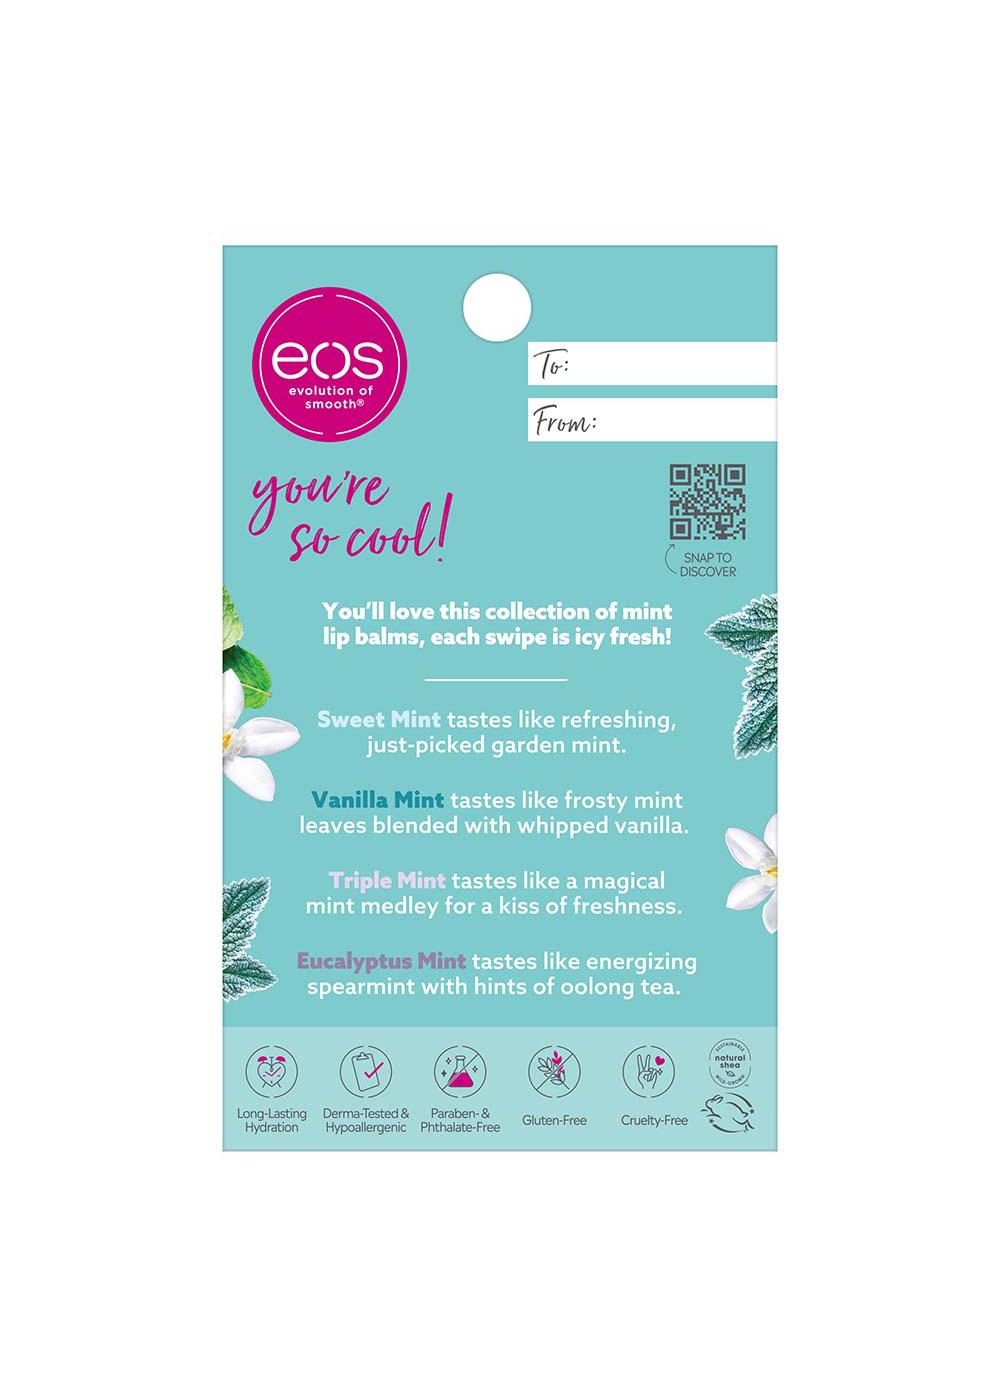 eos The Minty Cool Super Soft Shea Lip Balm - Total Refresh-Mint; image 2 of 2